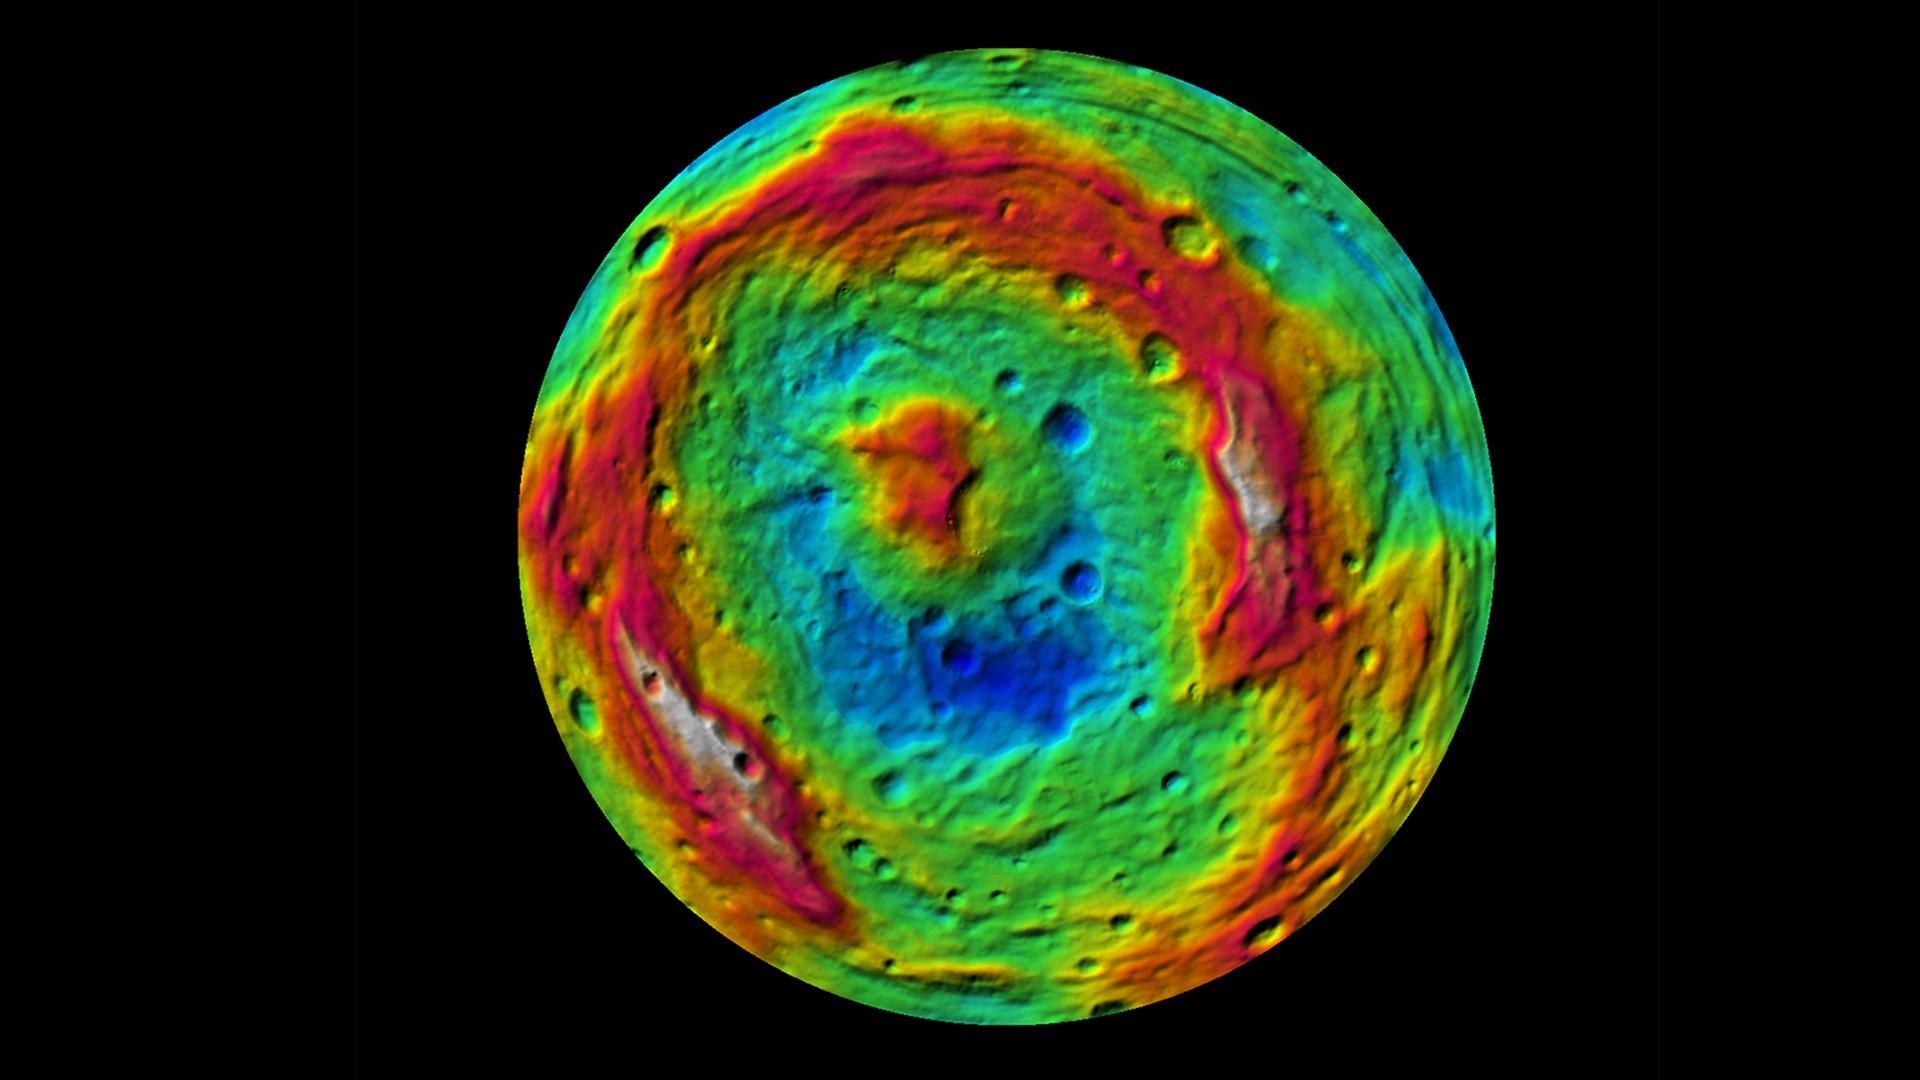 The topography of Vesta’s south pole